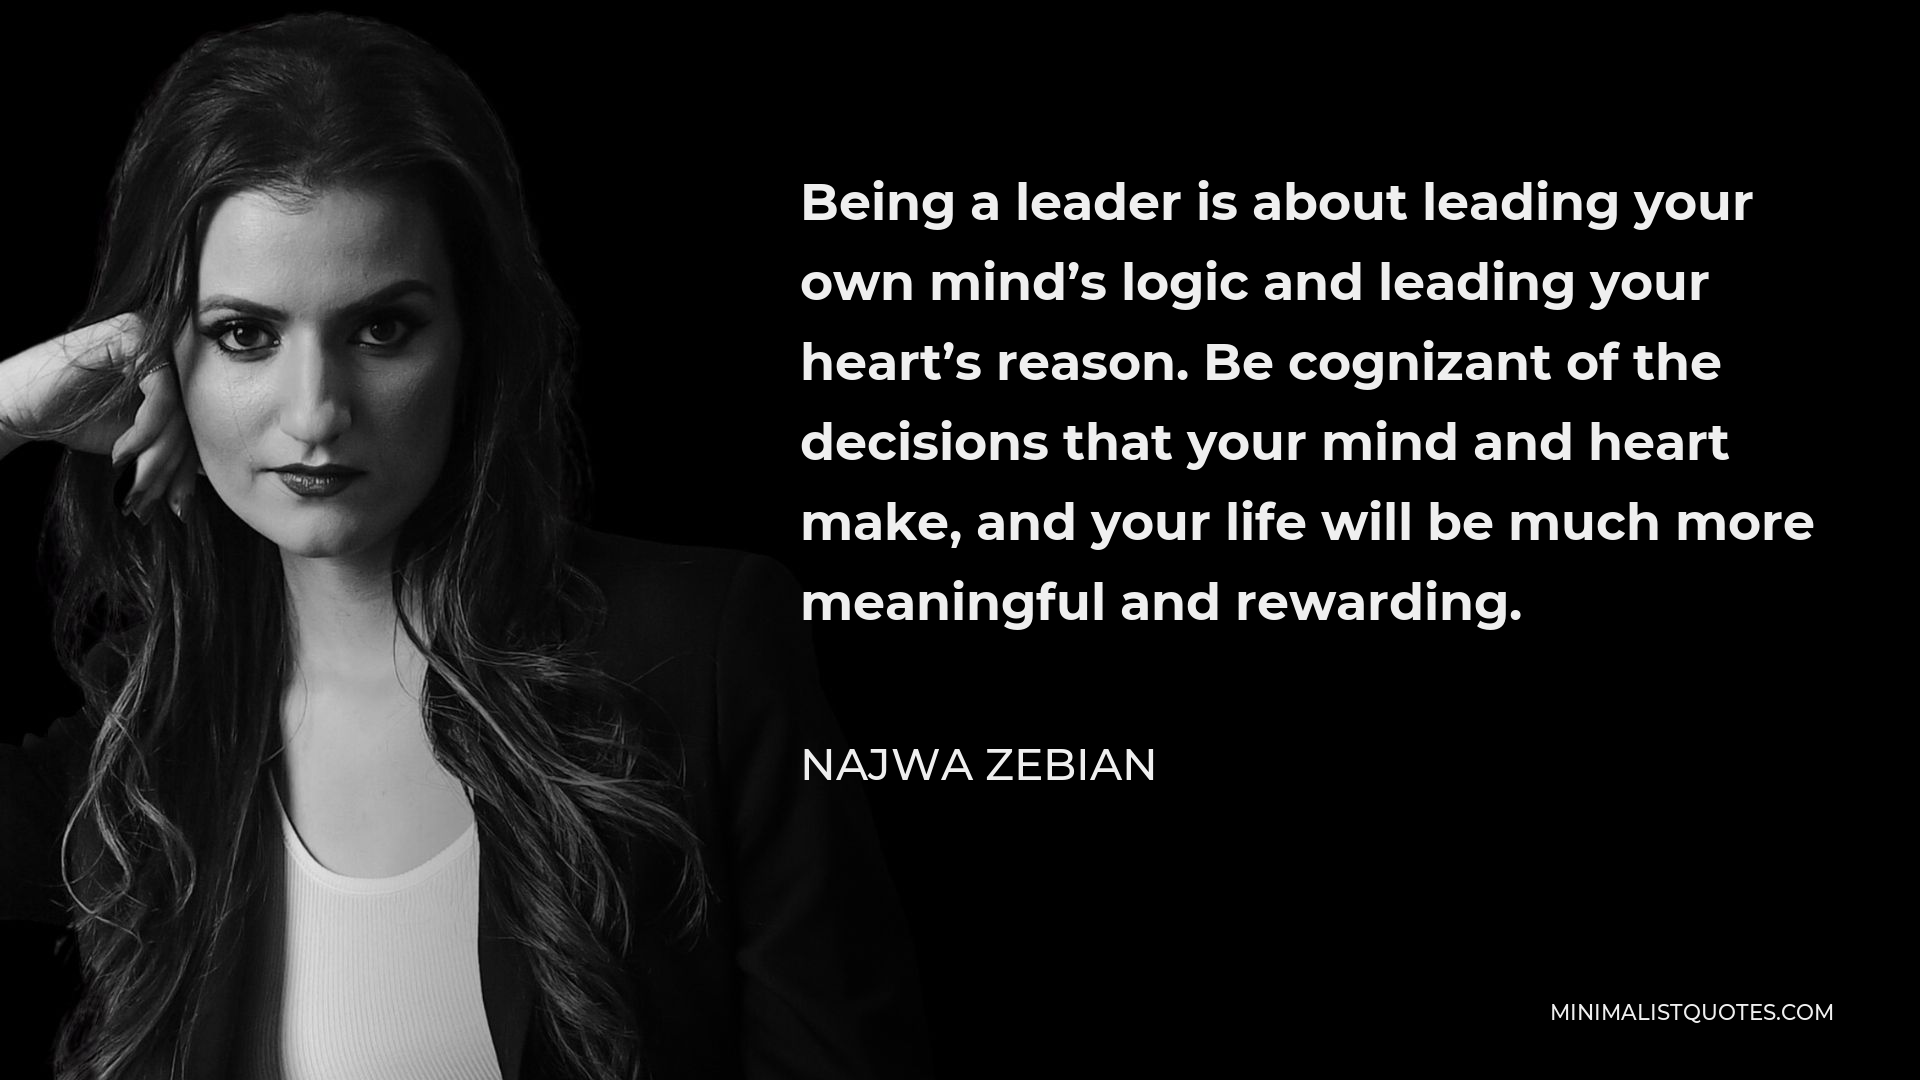 Najwa Zebian Quote - Being a leader is about leading your own mind’s logic and leading your heart’s reason. Be cognizant of the decisions that your mind and heart make, and your life will be much more meaningful and rewarding.